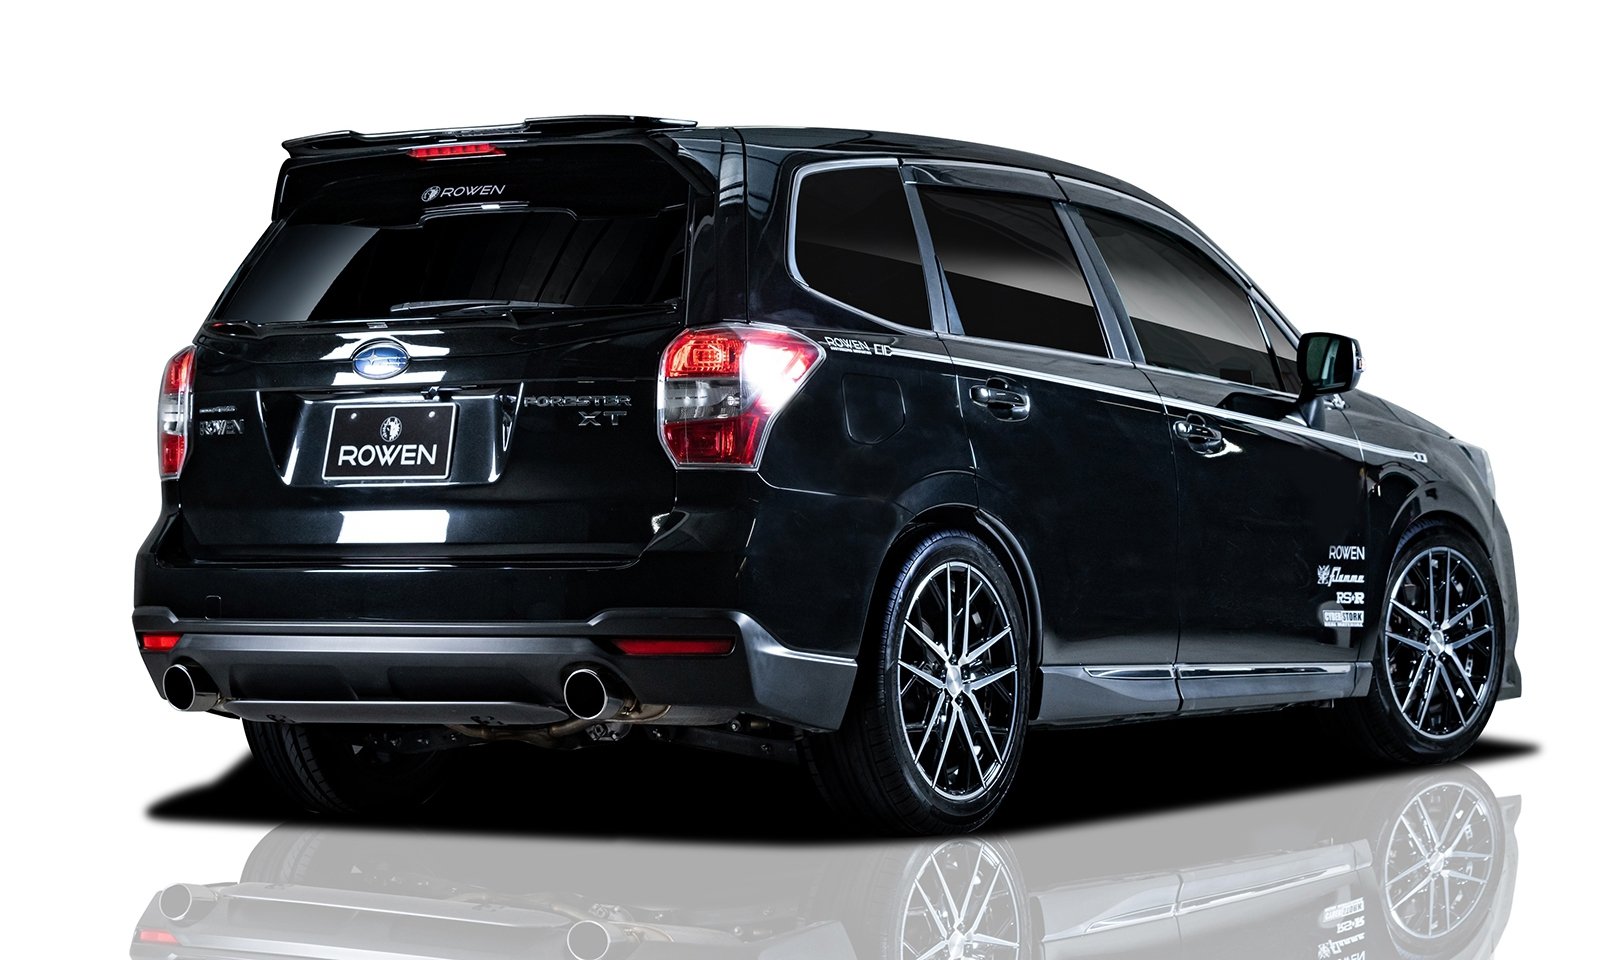 Check our price and buy Rowen body kit for Subaru Forester SJG!